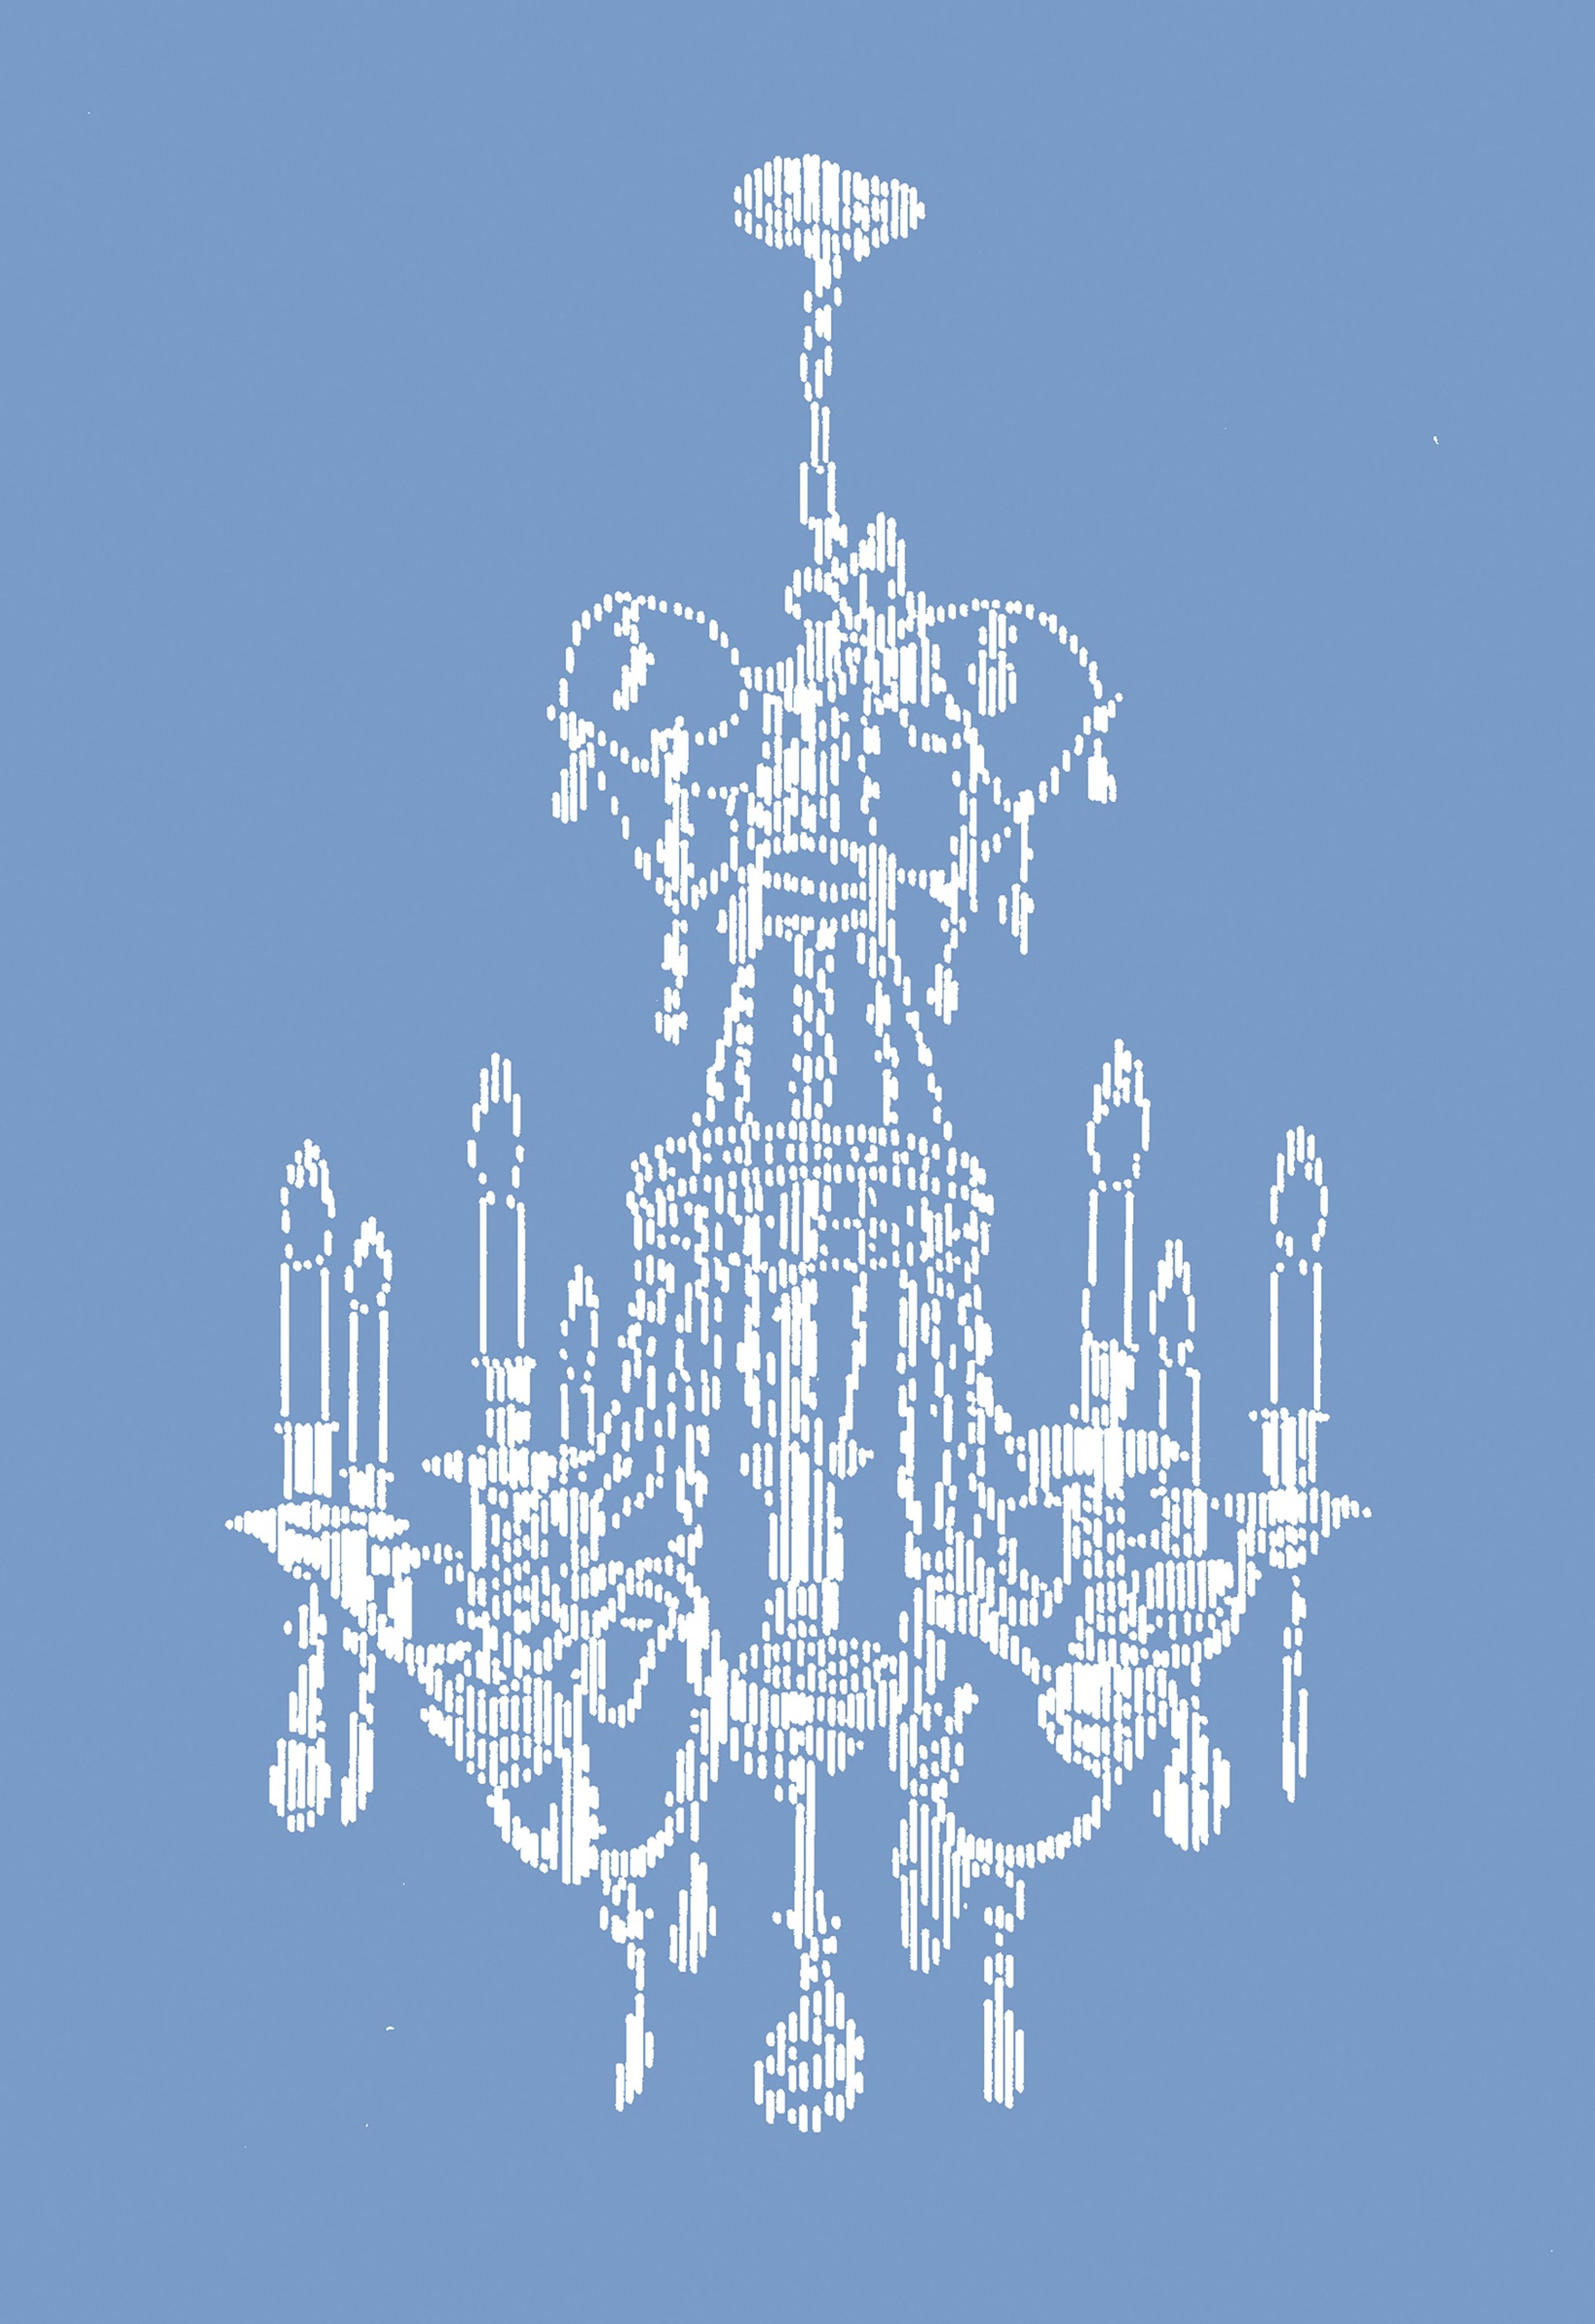 Illustration of a chandelier rendered in white lines against a blue background